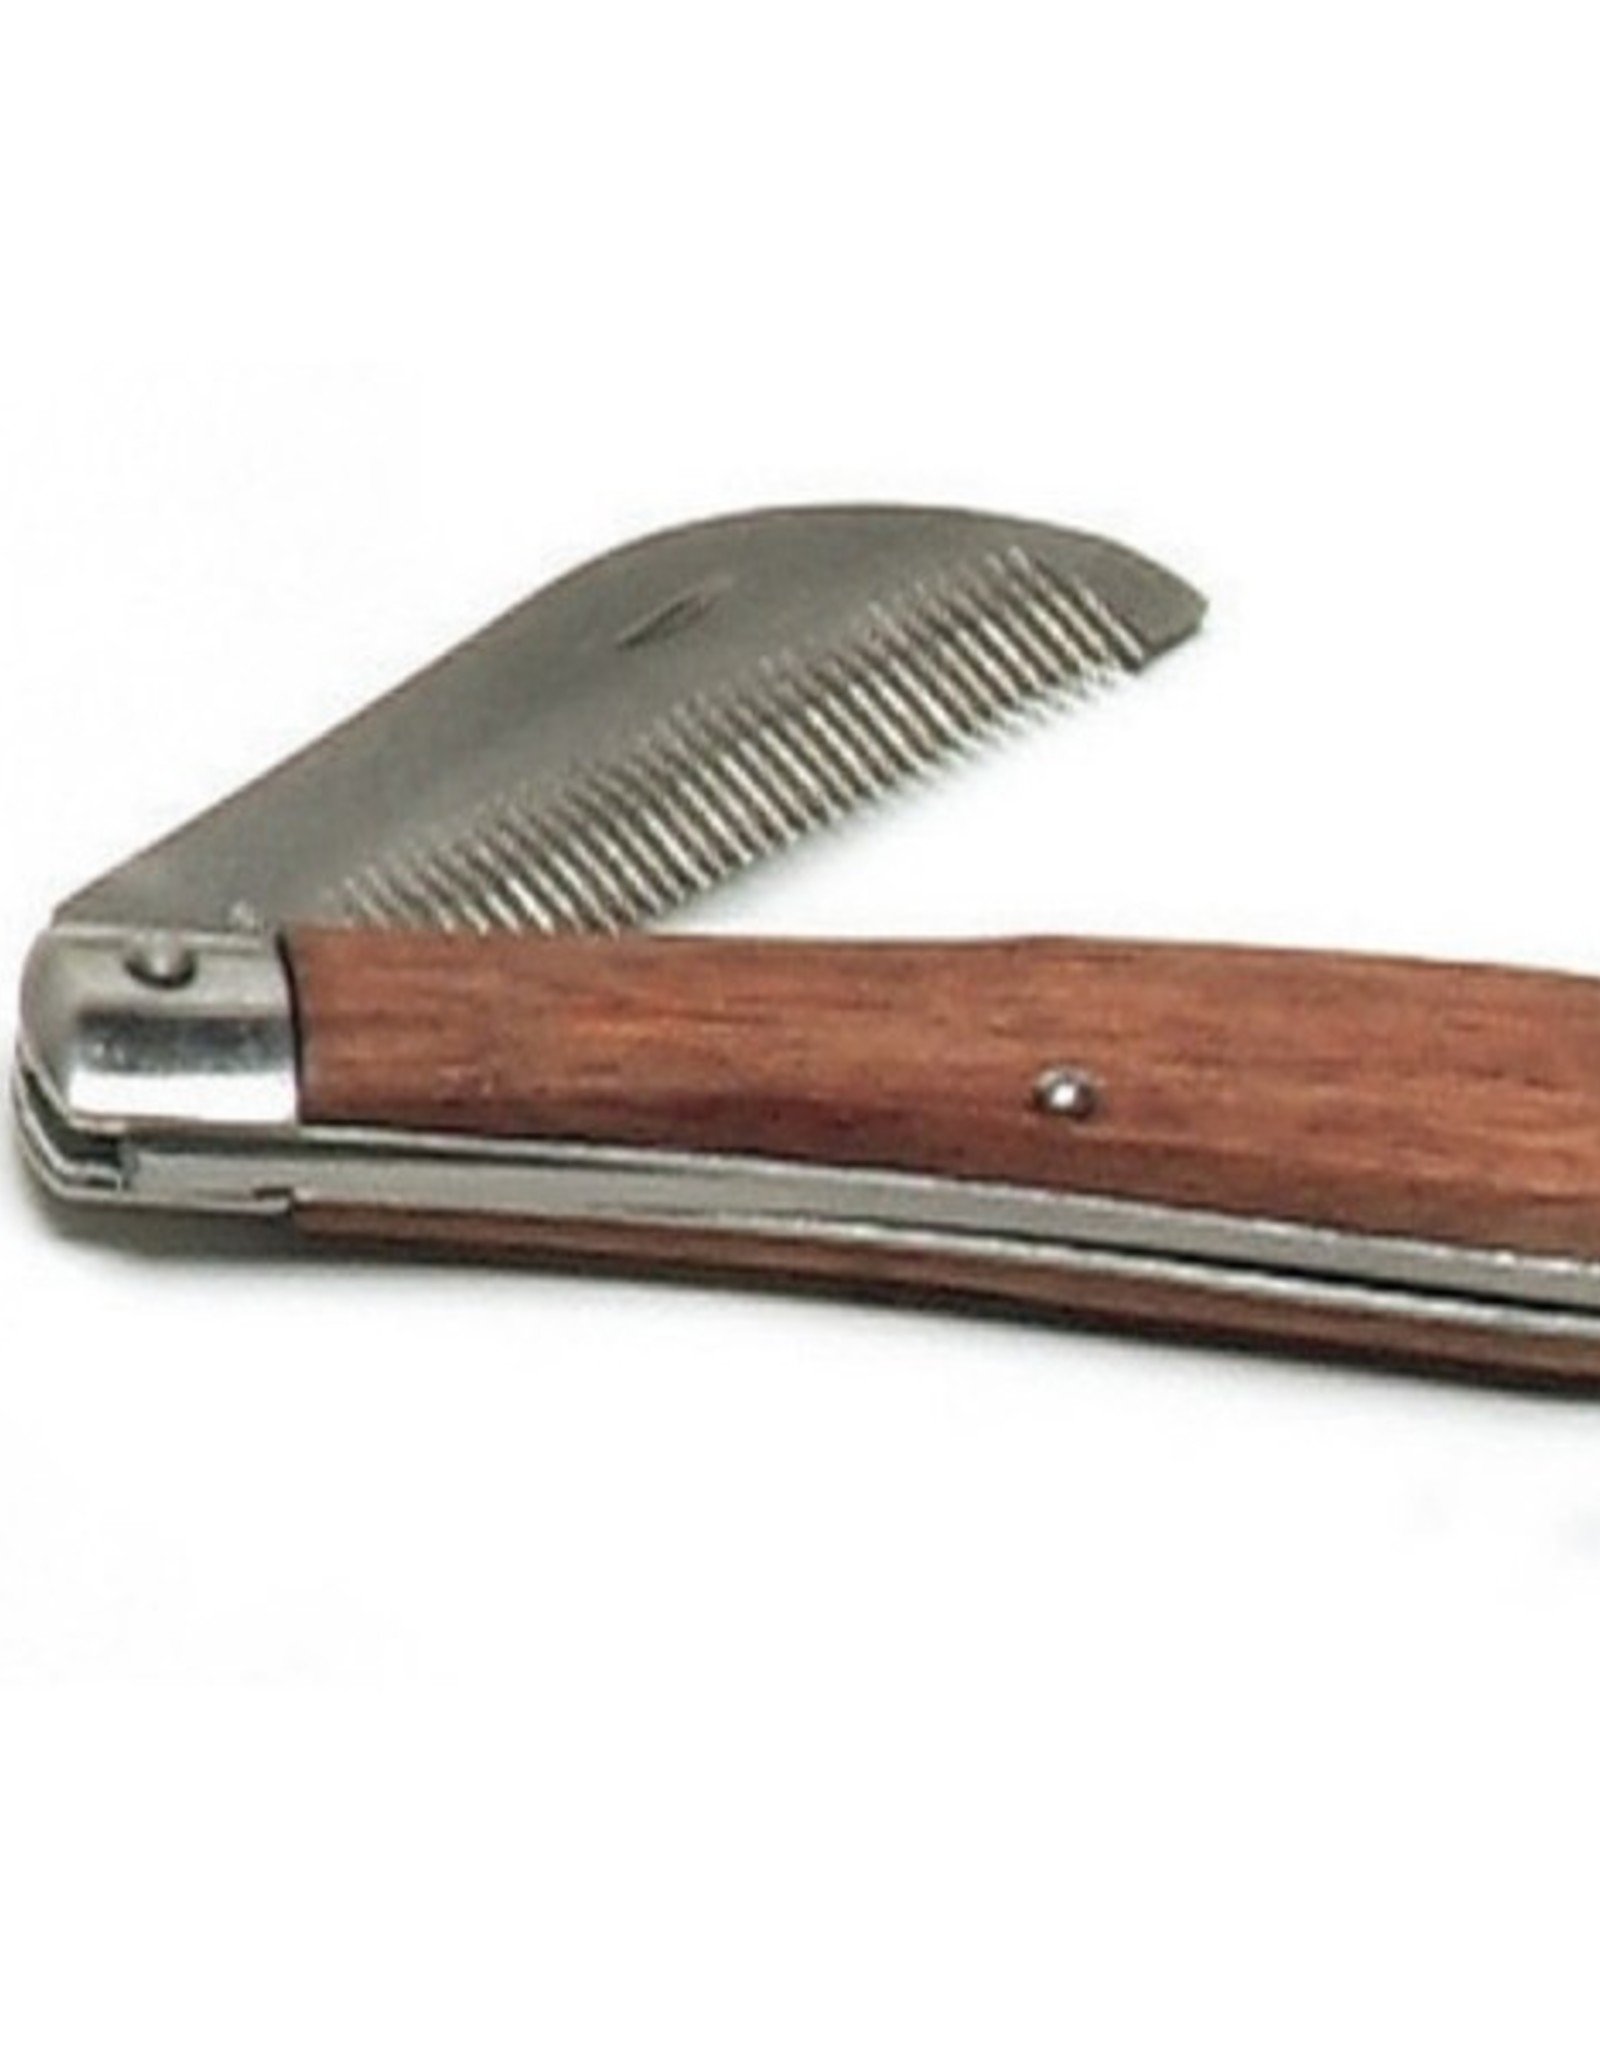 Folding Stripping Comb with Wooden Handle